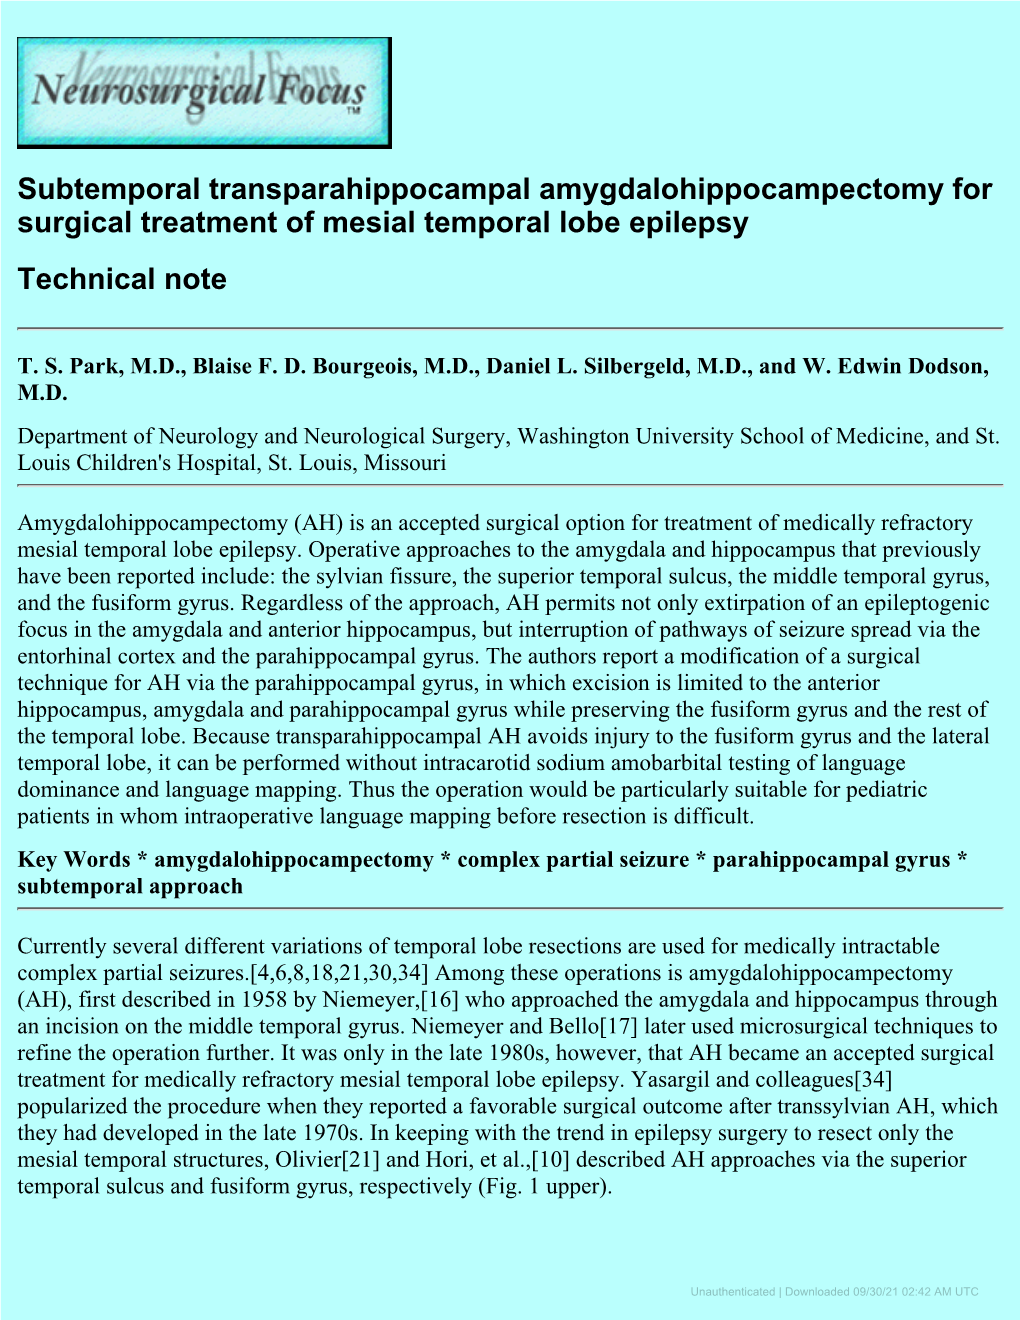 Subtemporal Transparahippocampal Amygdalohippocampectomy for Surgical Treatment of Mesial Temporal Lobe Epilepsy Technical Note